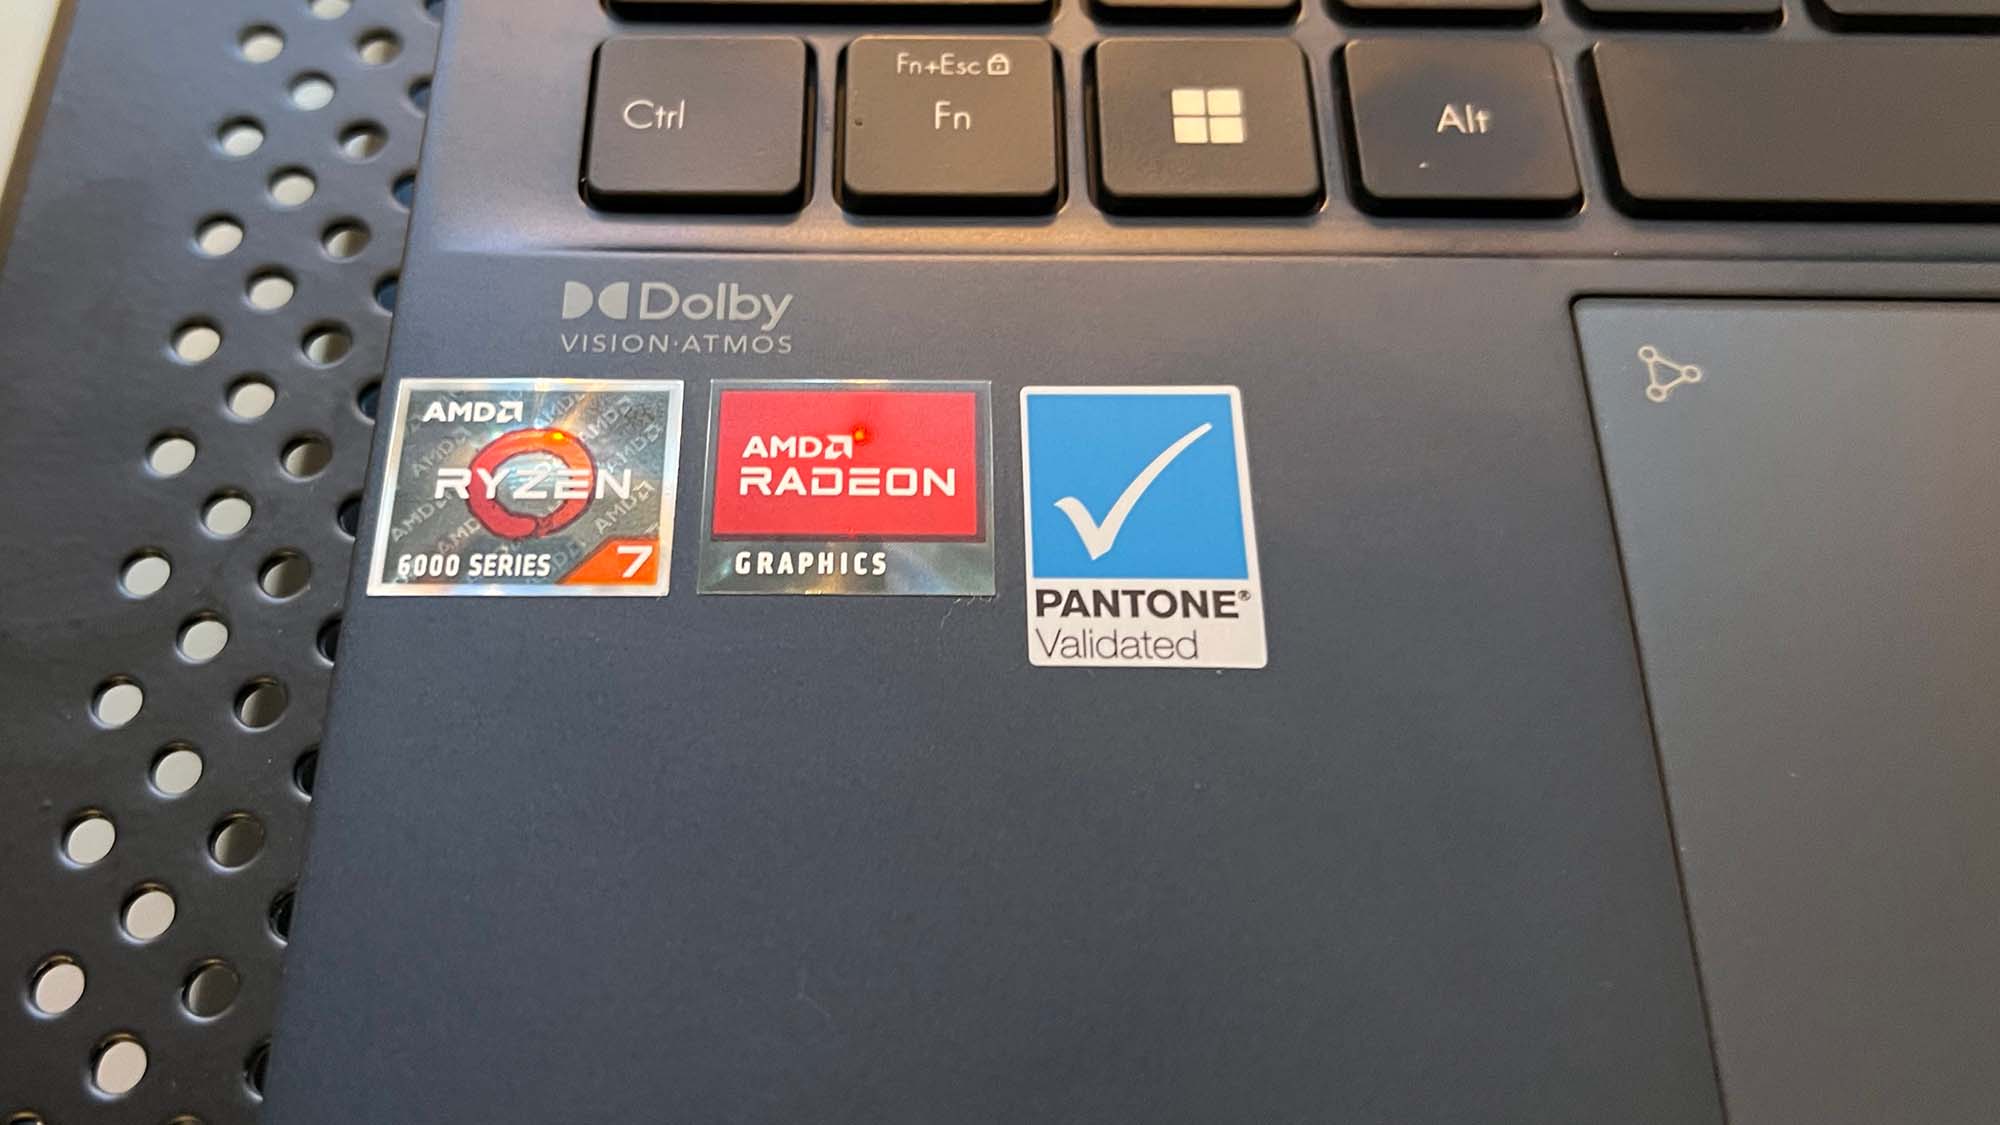 A close-up of the AMD, Radeon and Pantone certified stickers on the Asus Zenbook S 13 OLED